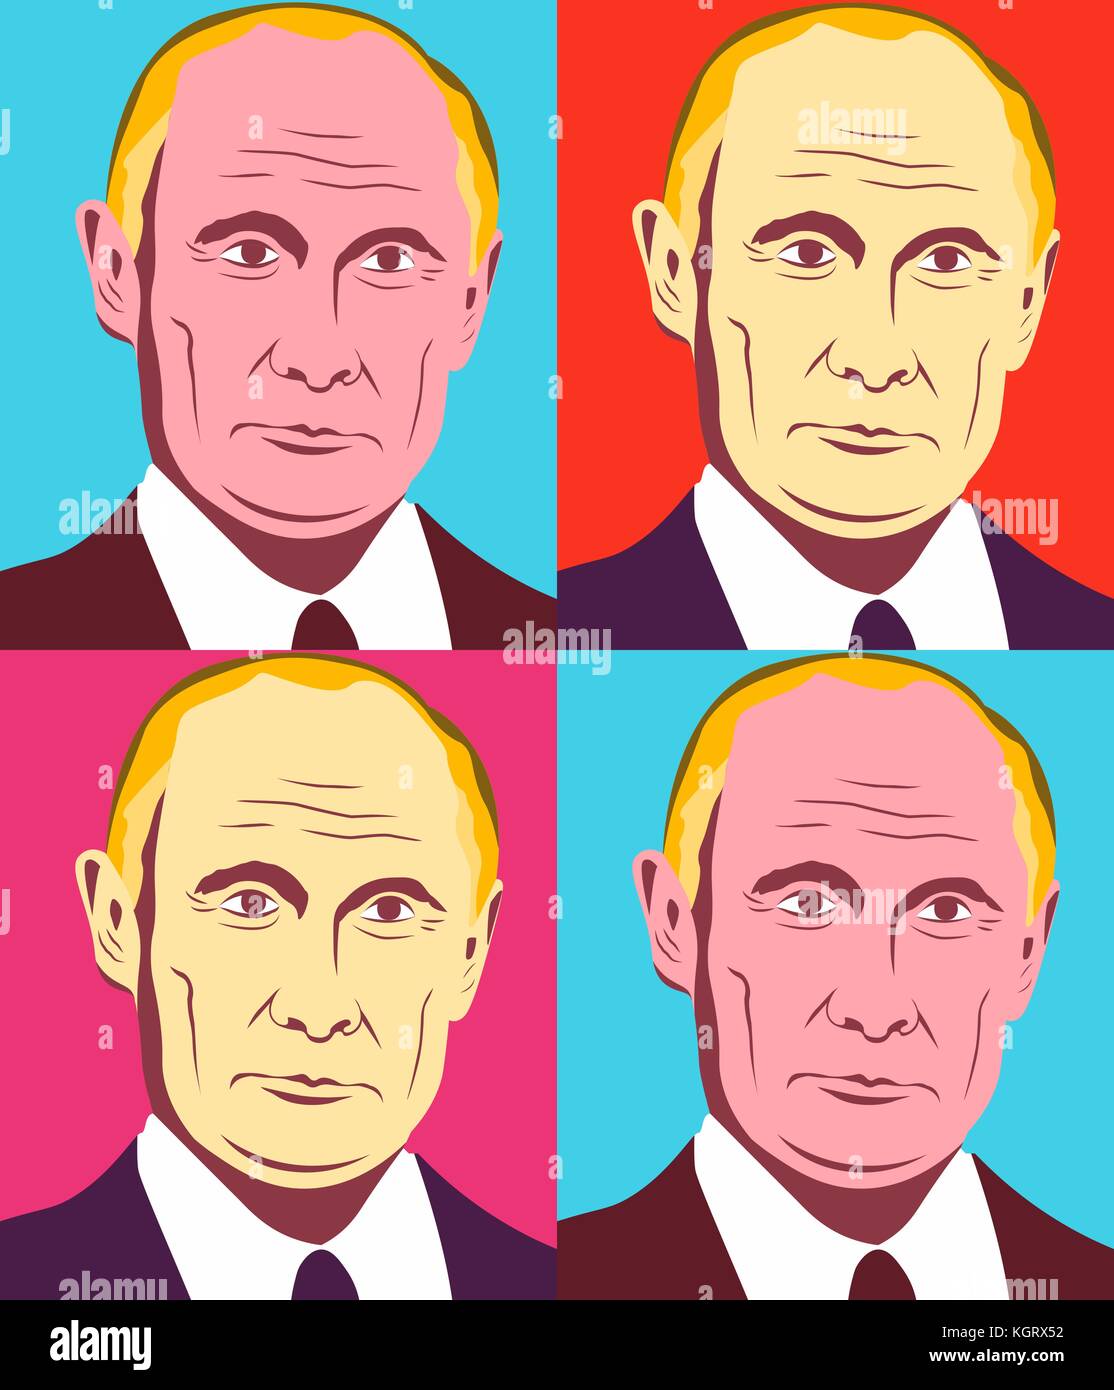 November 10 2017 Editorial illustration of the Russian Federation President Vladimir Putin in Andy Warhol style. Stock Vector